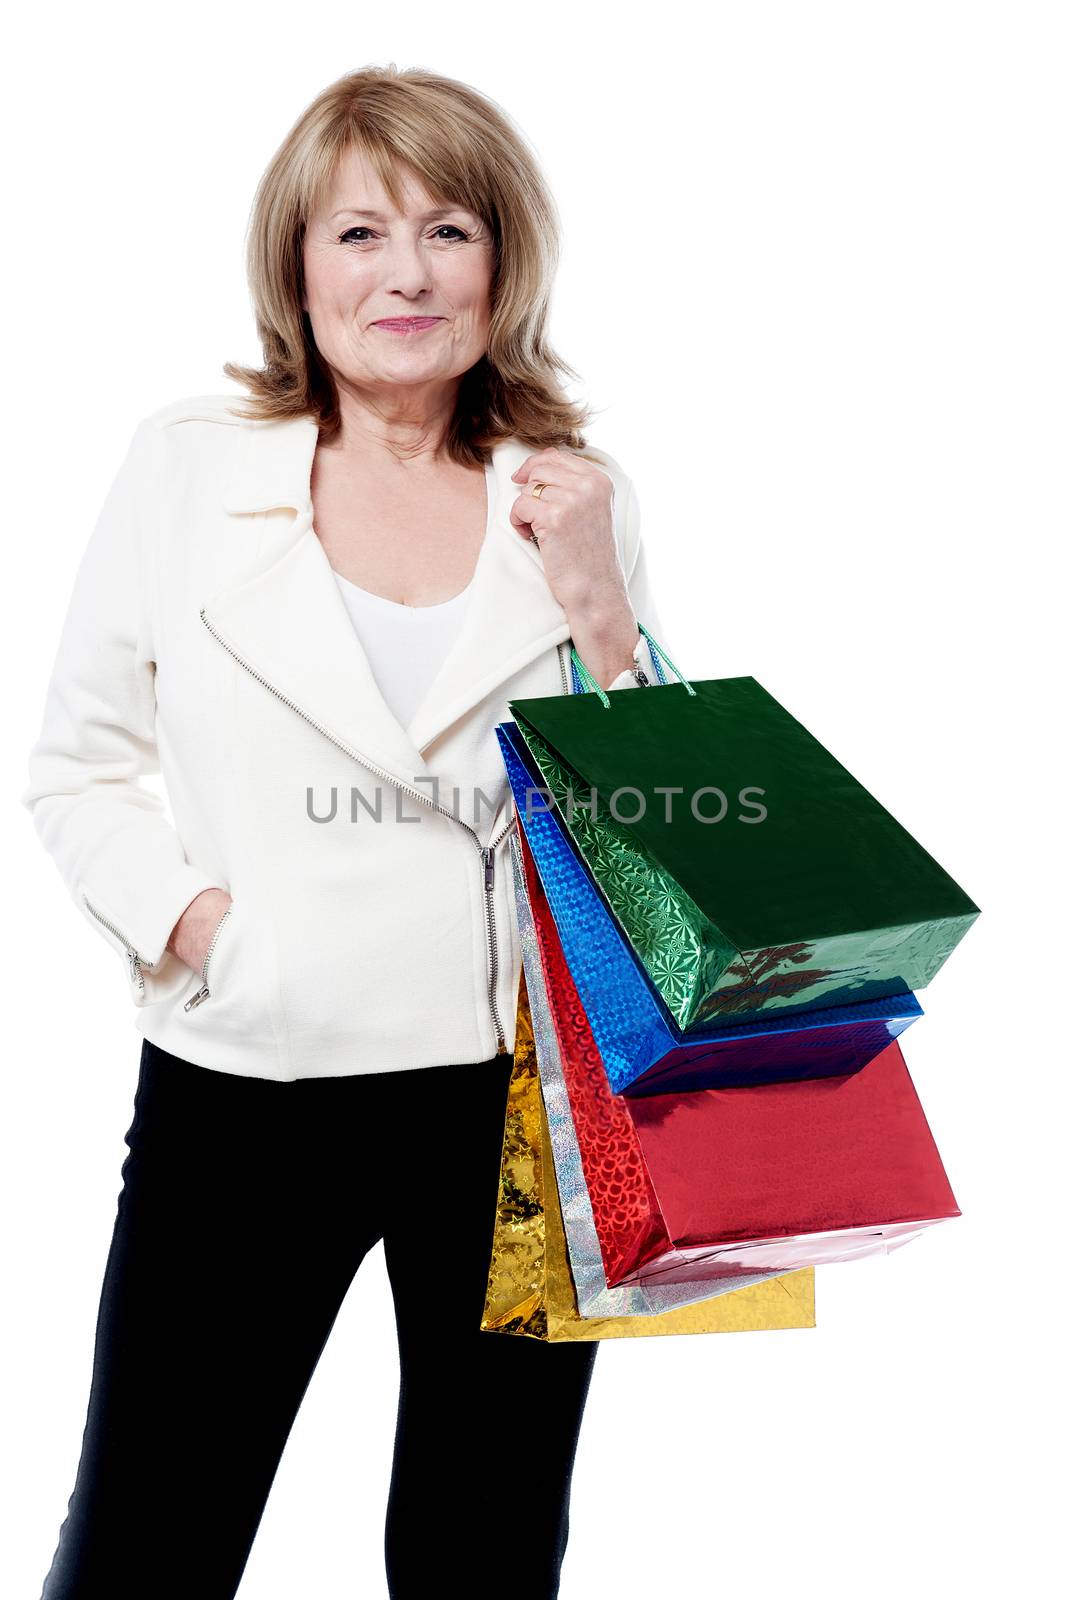 The sale is on, shop fast! by stockyimages